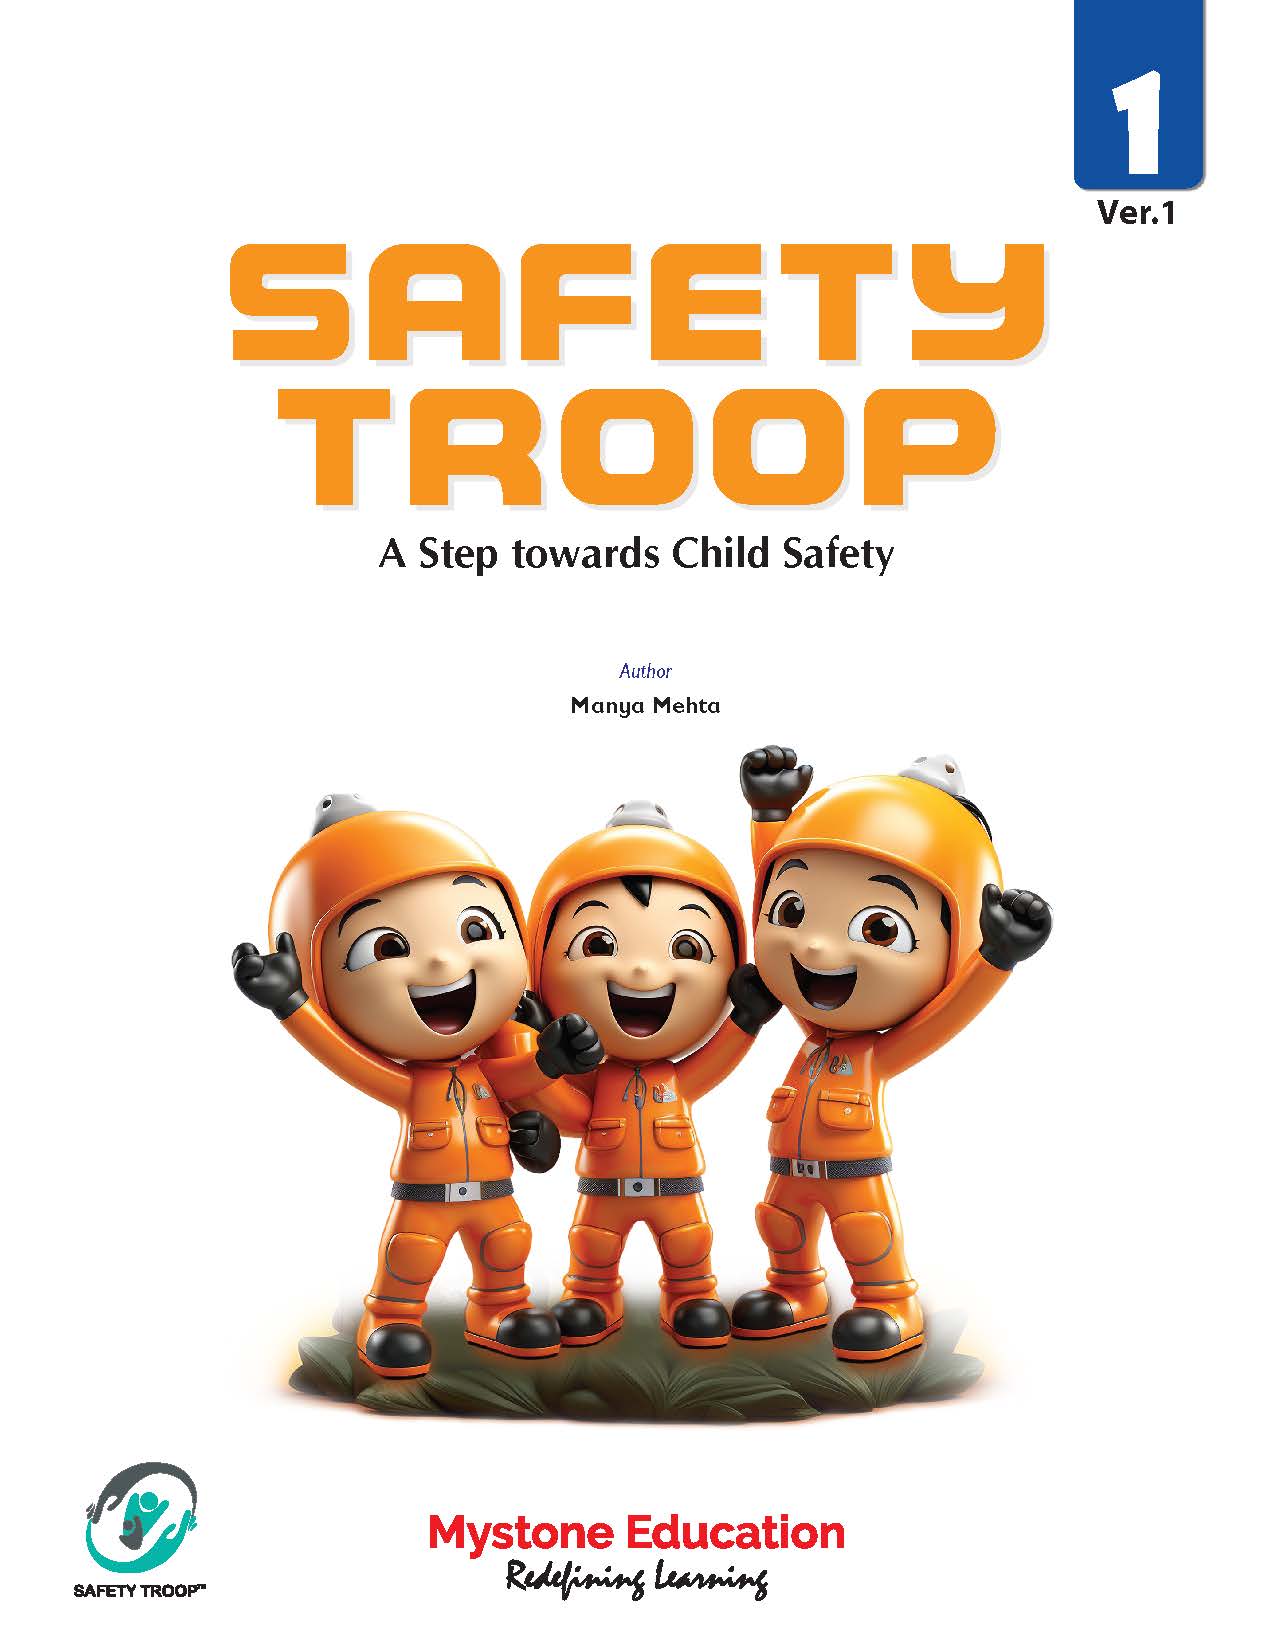 Safety Troop (A Step Towards Child Safety) Class 1 Ver 1